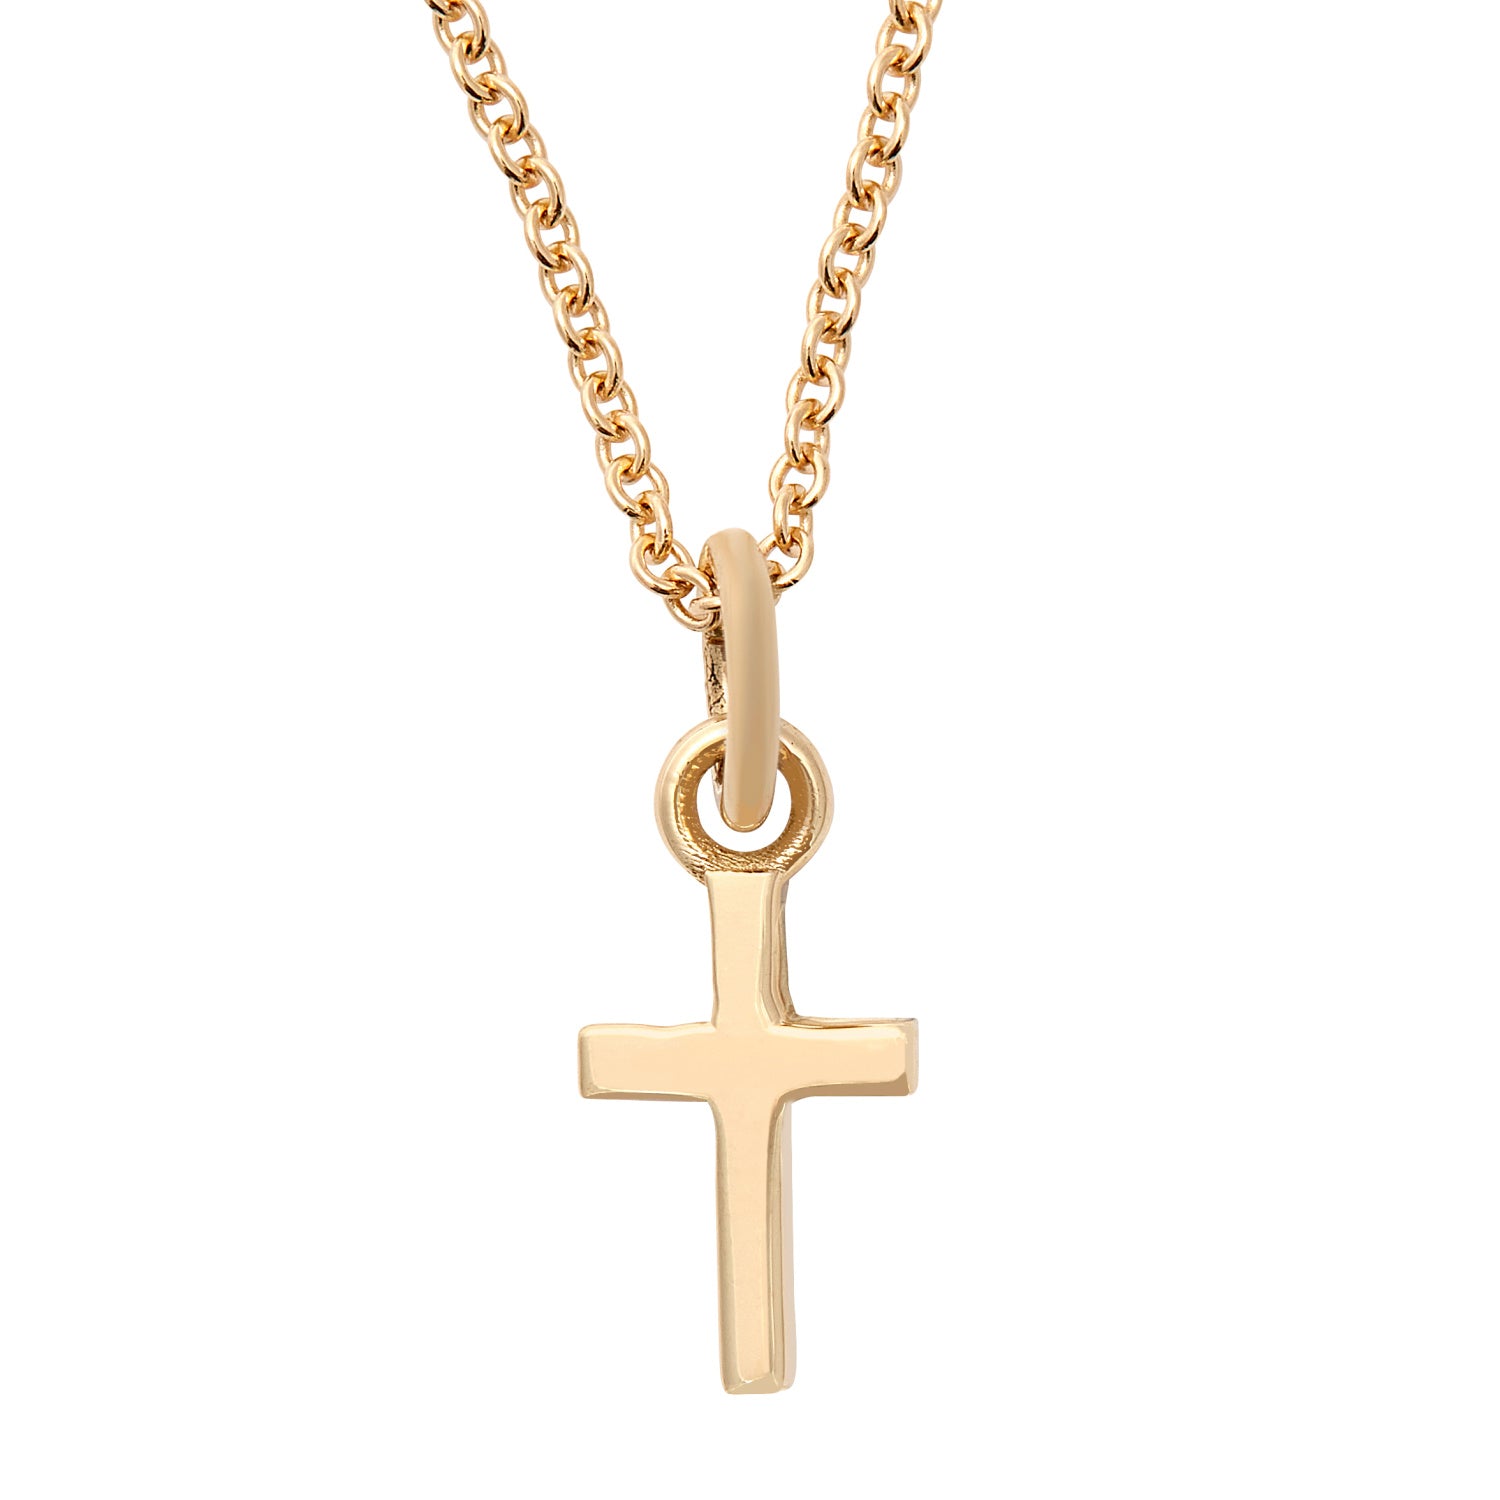 Gold Cross Layering Pendant Necklace Gold Filled 16